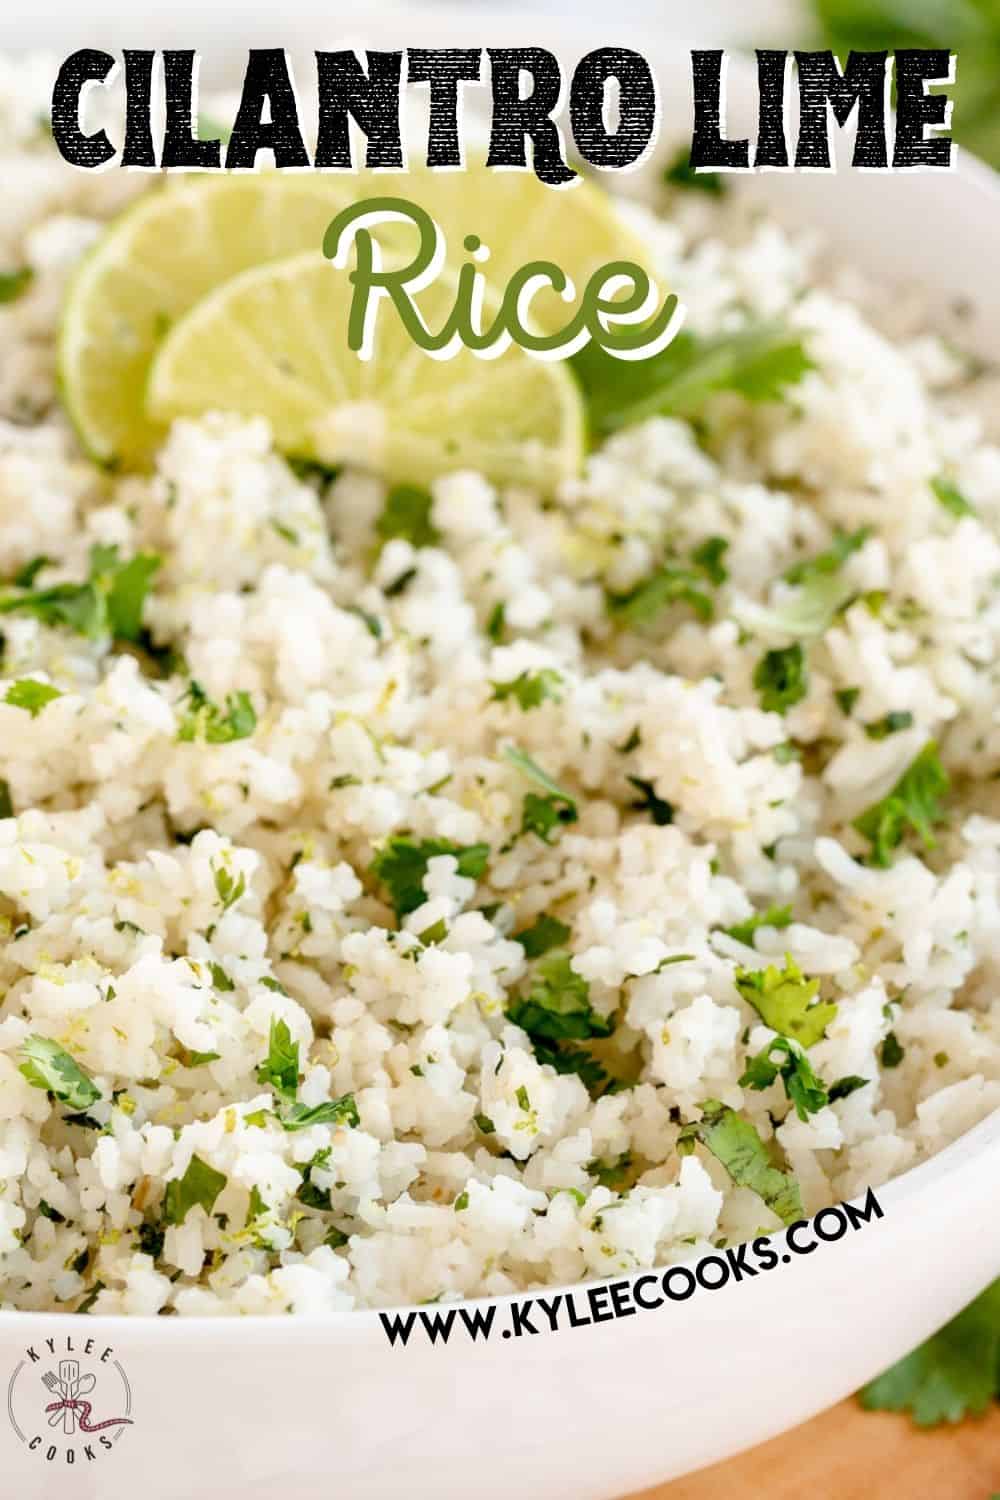 cilantro lime rice with text overlay